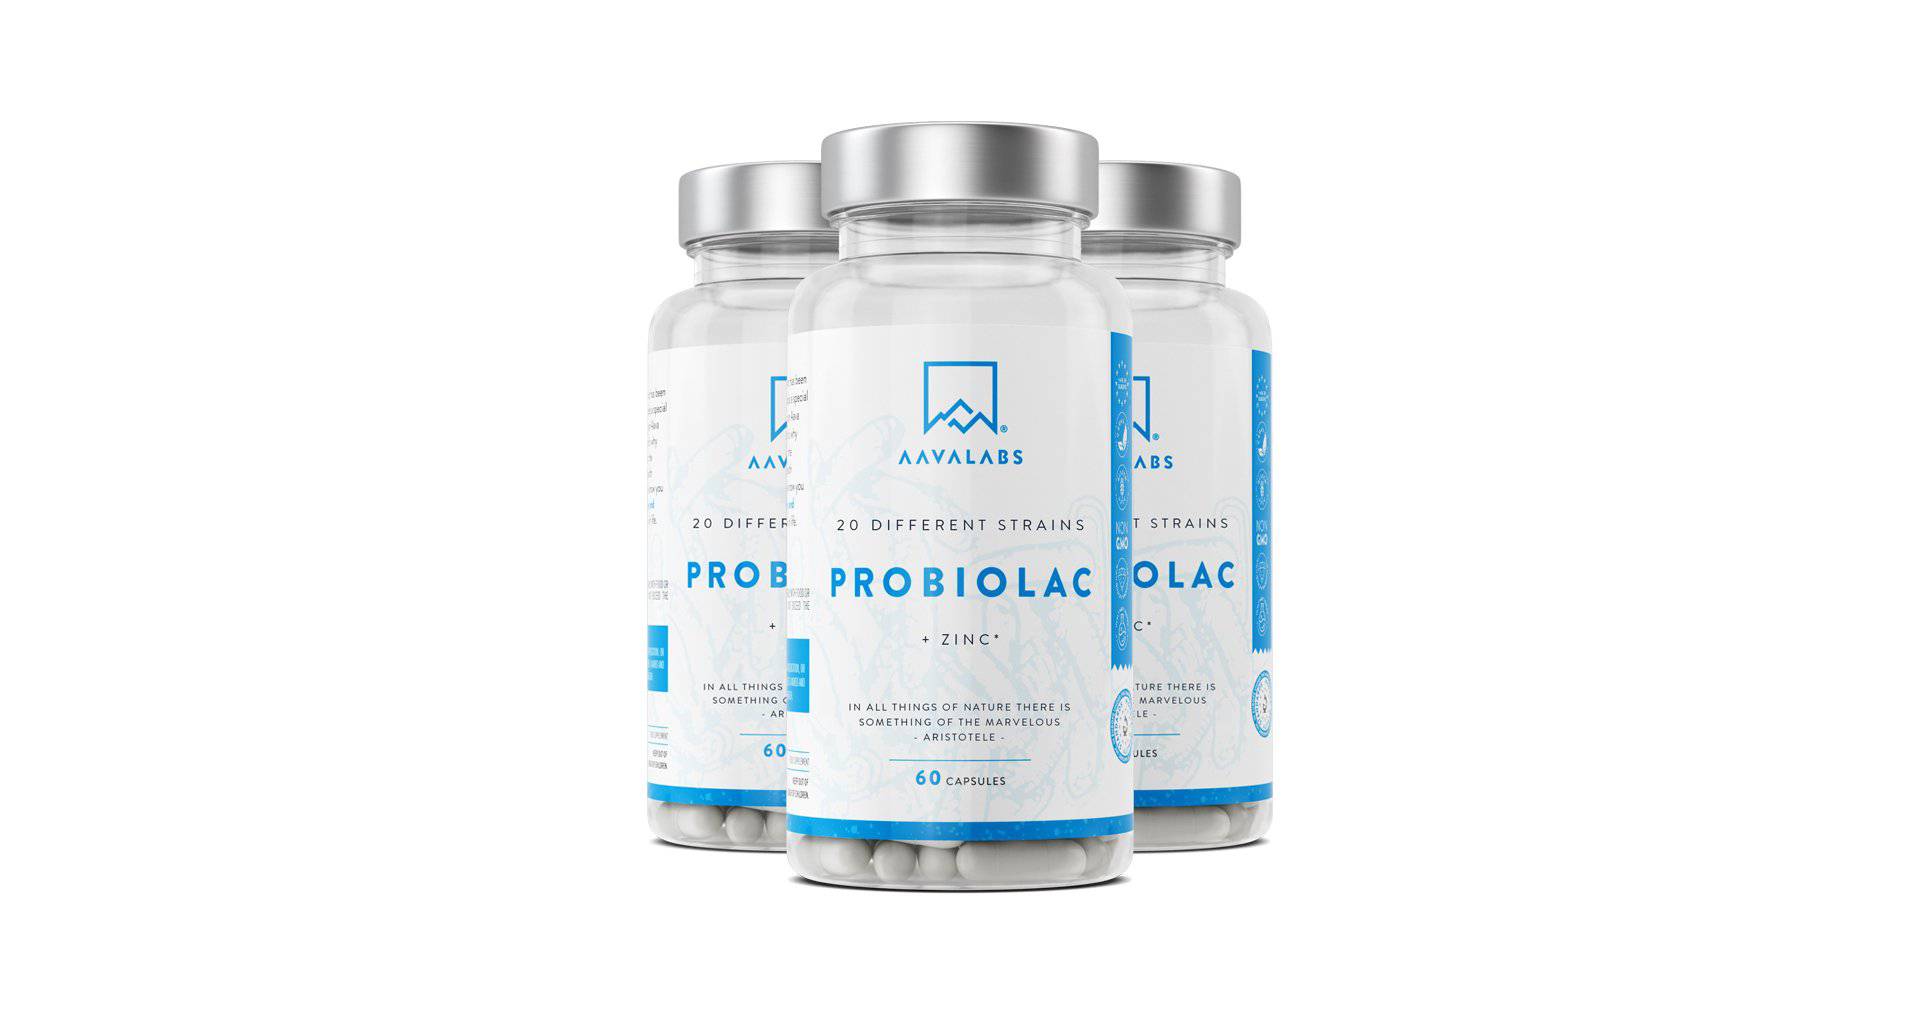 PROBIOLAC PROBIOTIC 20 STRAINS VALUE PACK  - 6 MONTHS SUPPLY - Aava Labs